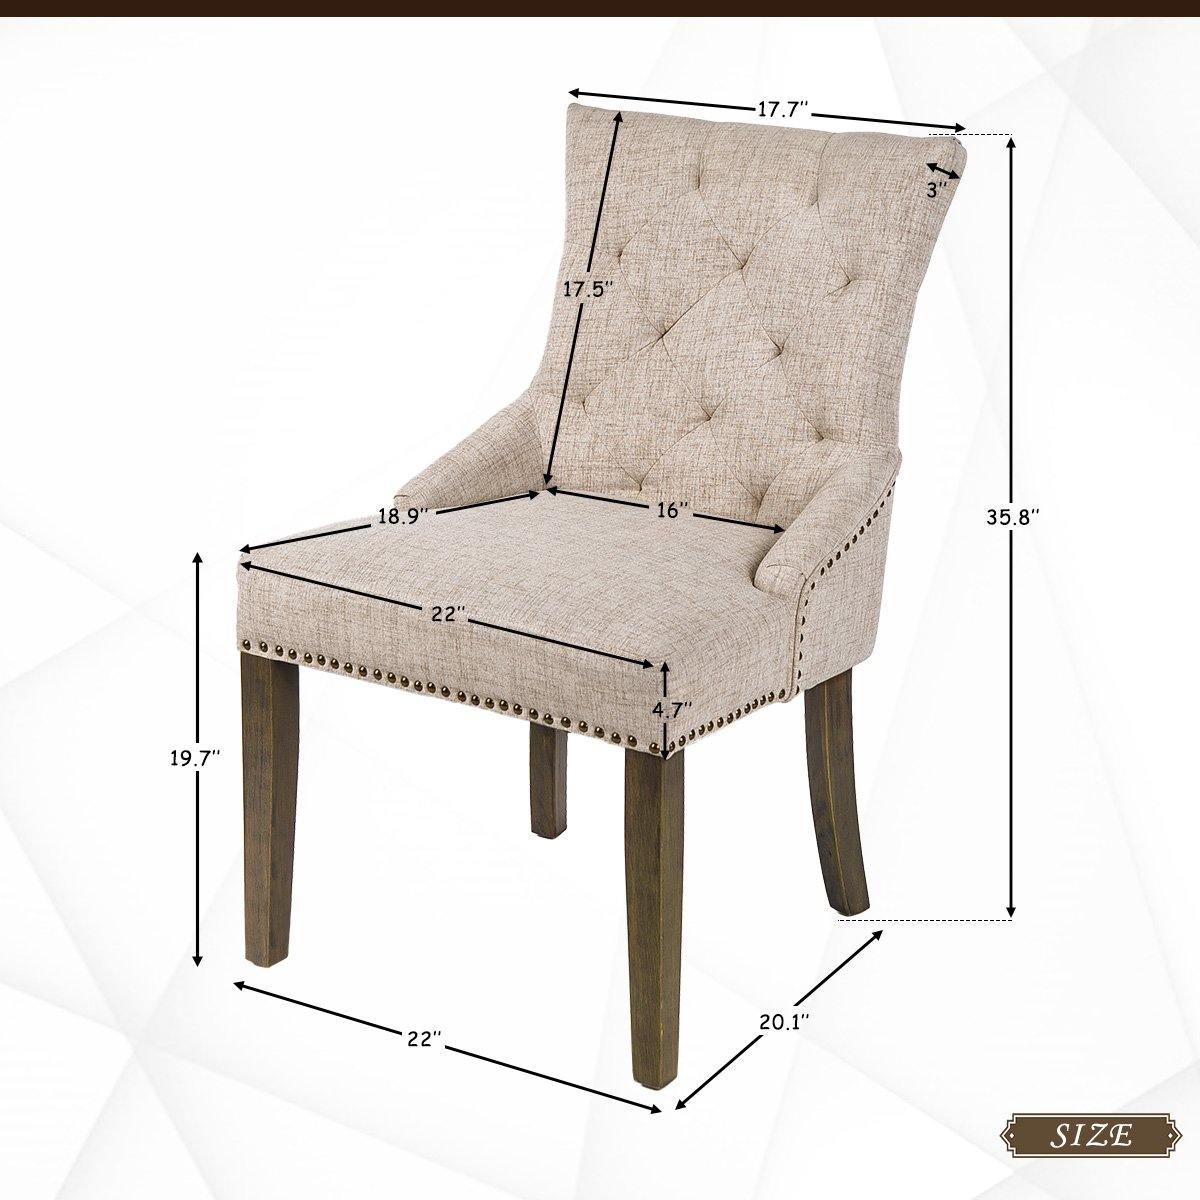 2PC Dining Chair Leisure Padded Chair with Armrest, Nailed Trim, Beige.